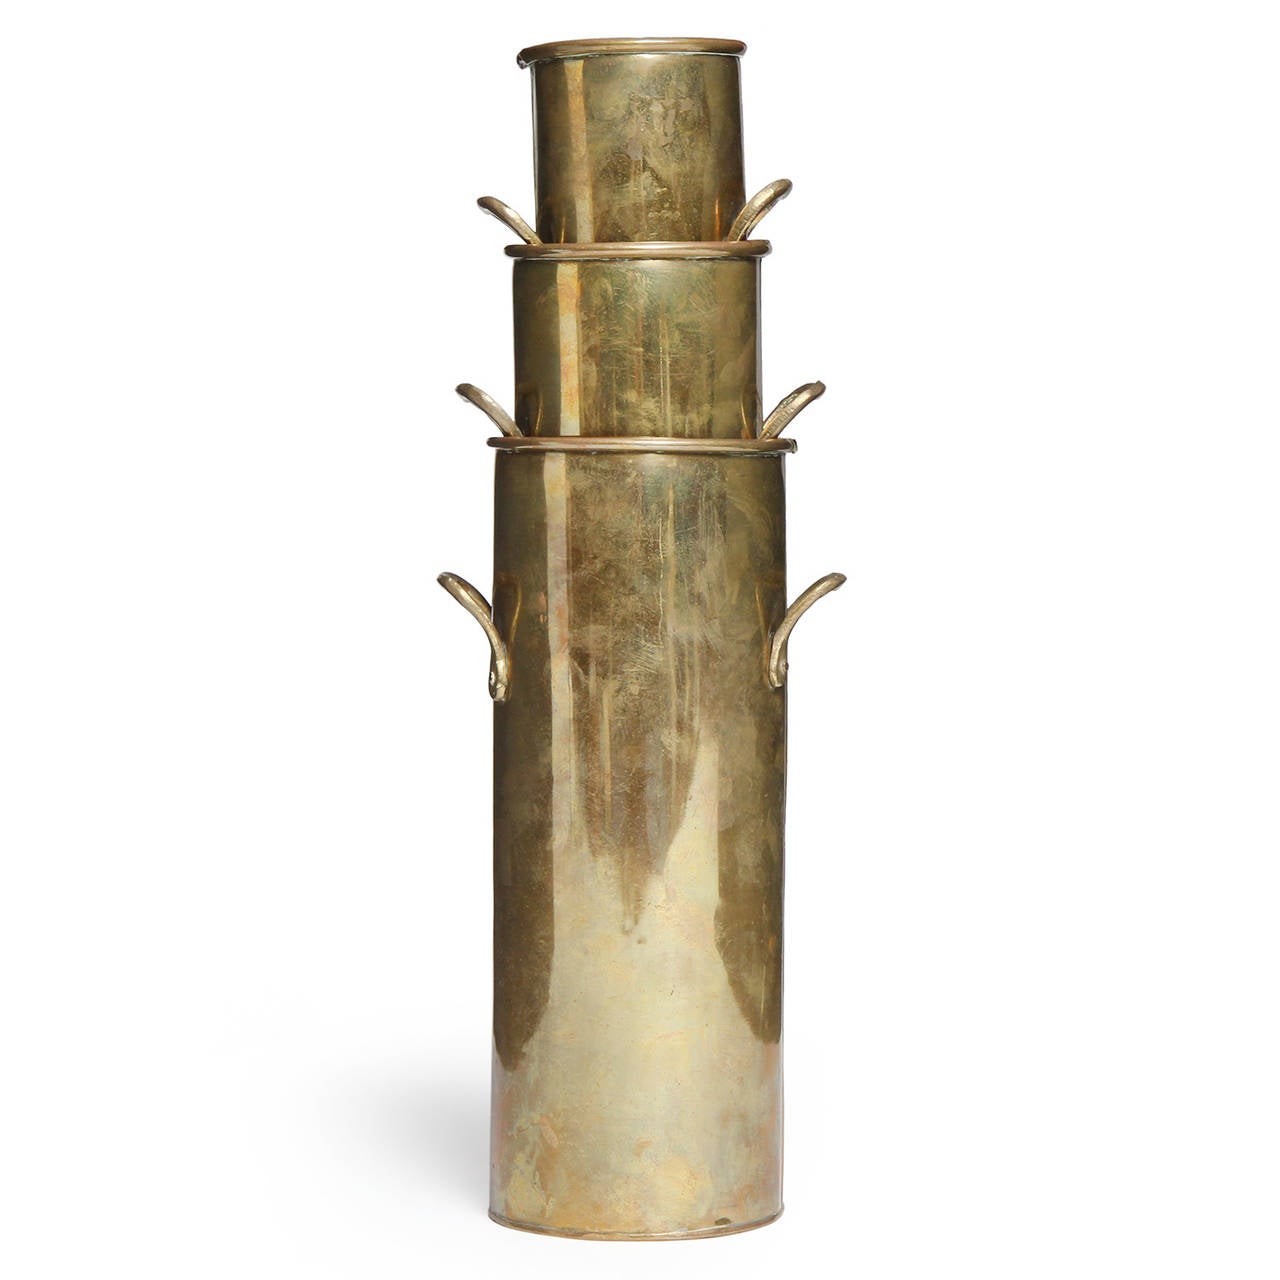 An elegant and finely crafted set of three nesting cylindrical patinated brass vases having applied handles and rolled top edges.